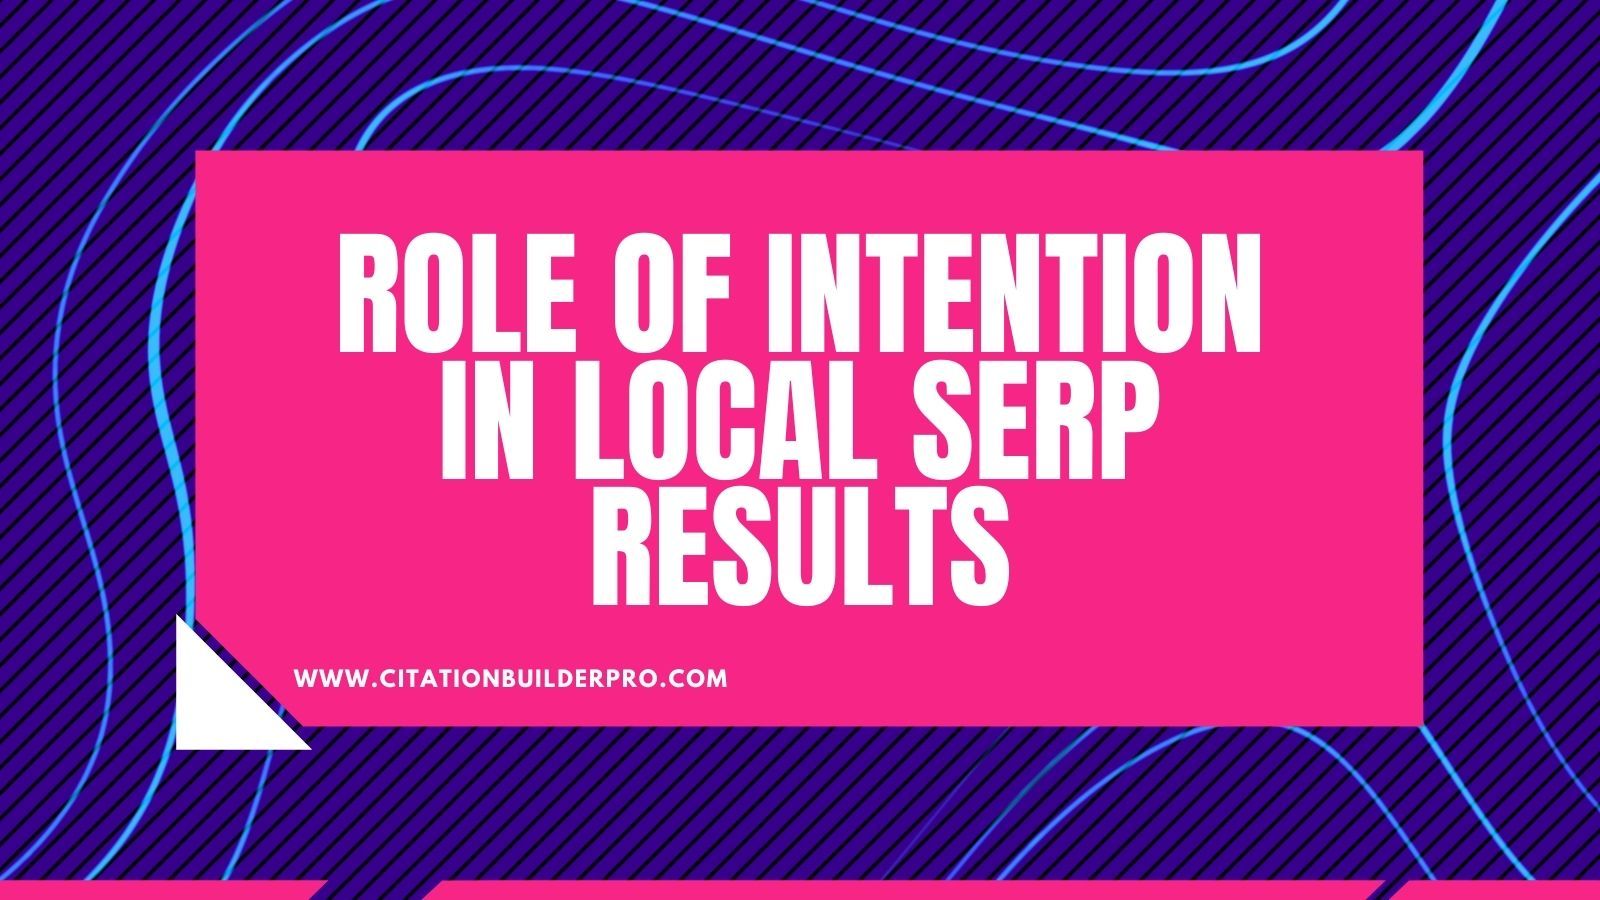 Role-of-intention-in-local-serp-results